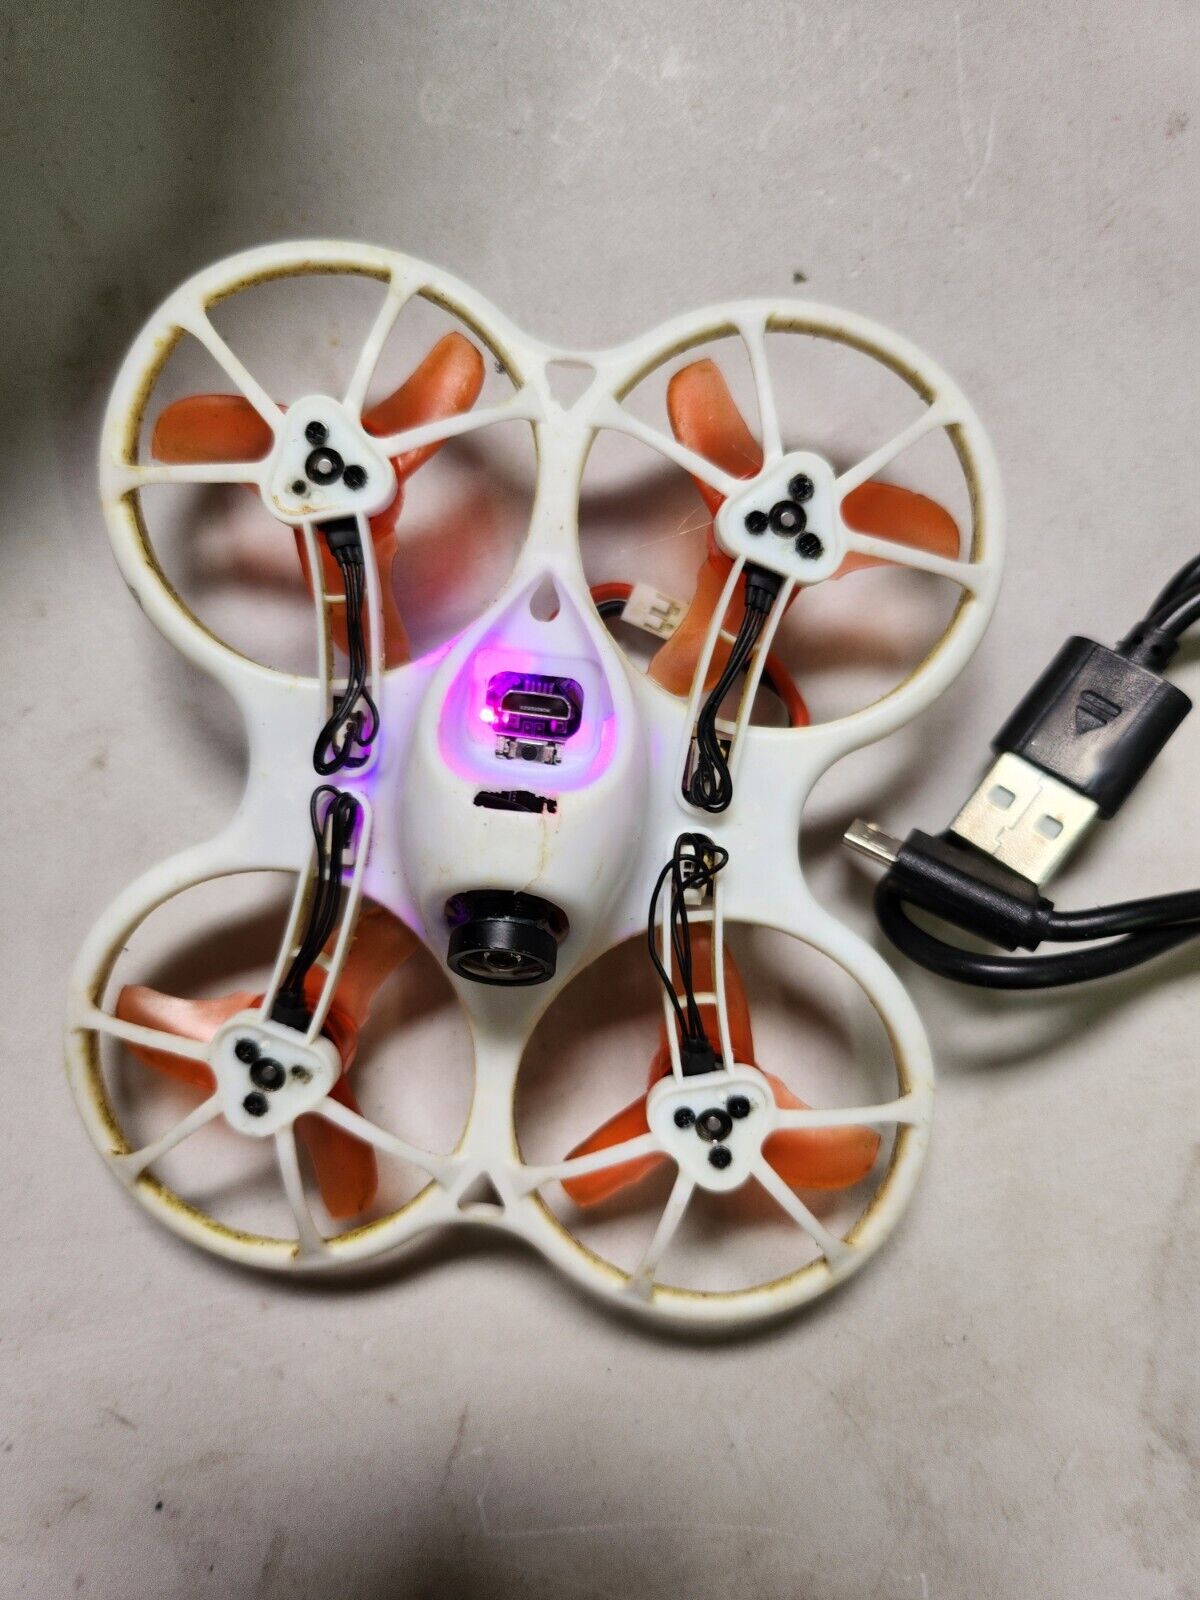 EMAX Tinyhawk Racing Drone with FPV Kit